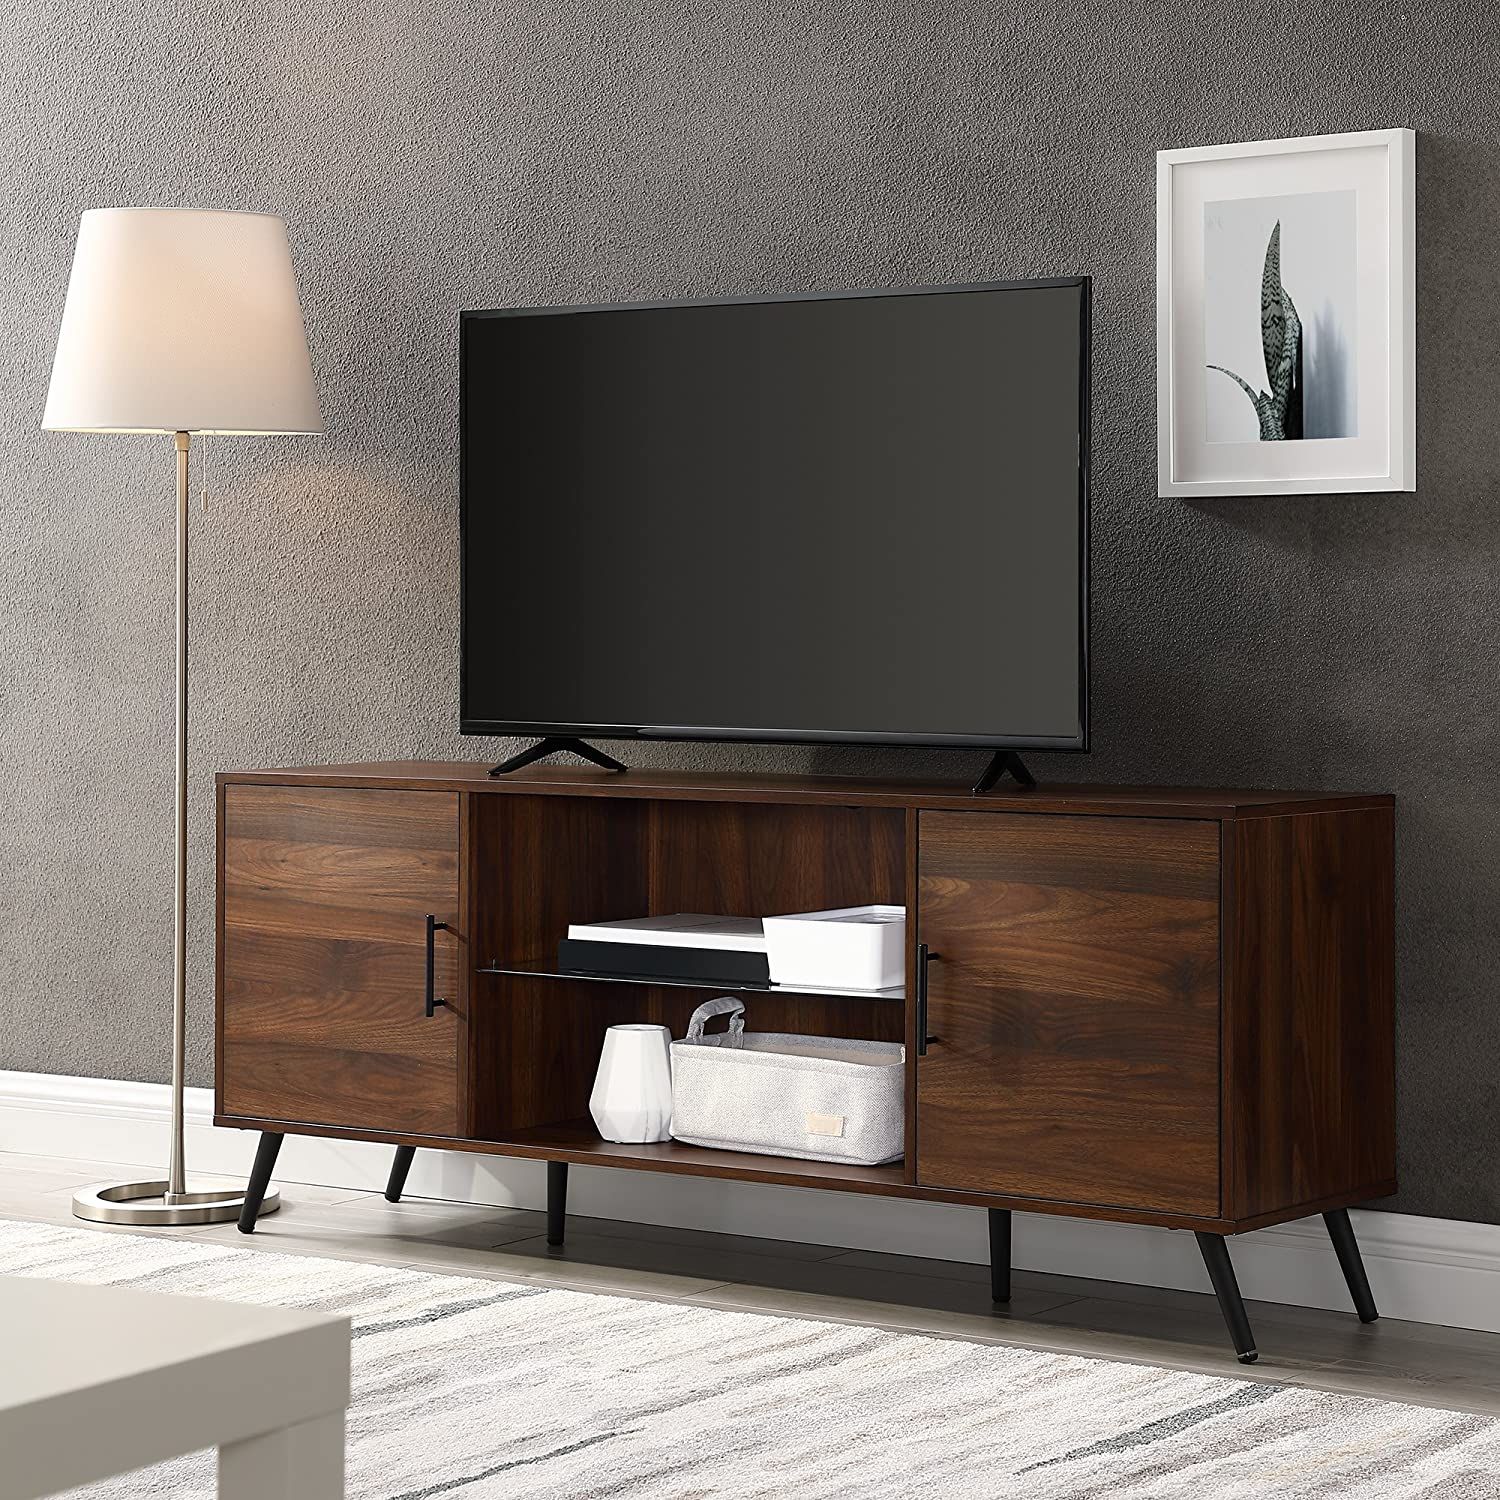 The Best Tv Stands To House Your Home Entertainment – Bob Vila With Oaklee Tv Stands (View 9 of 20)